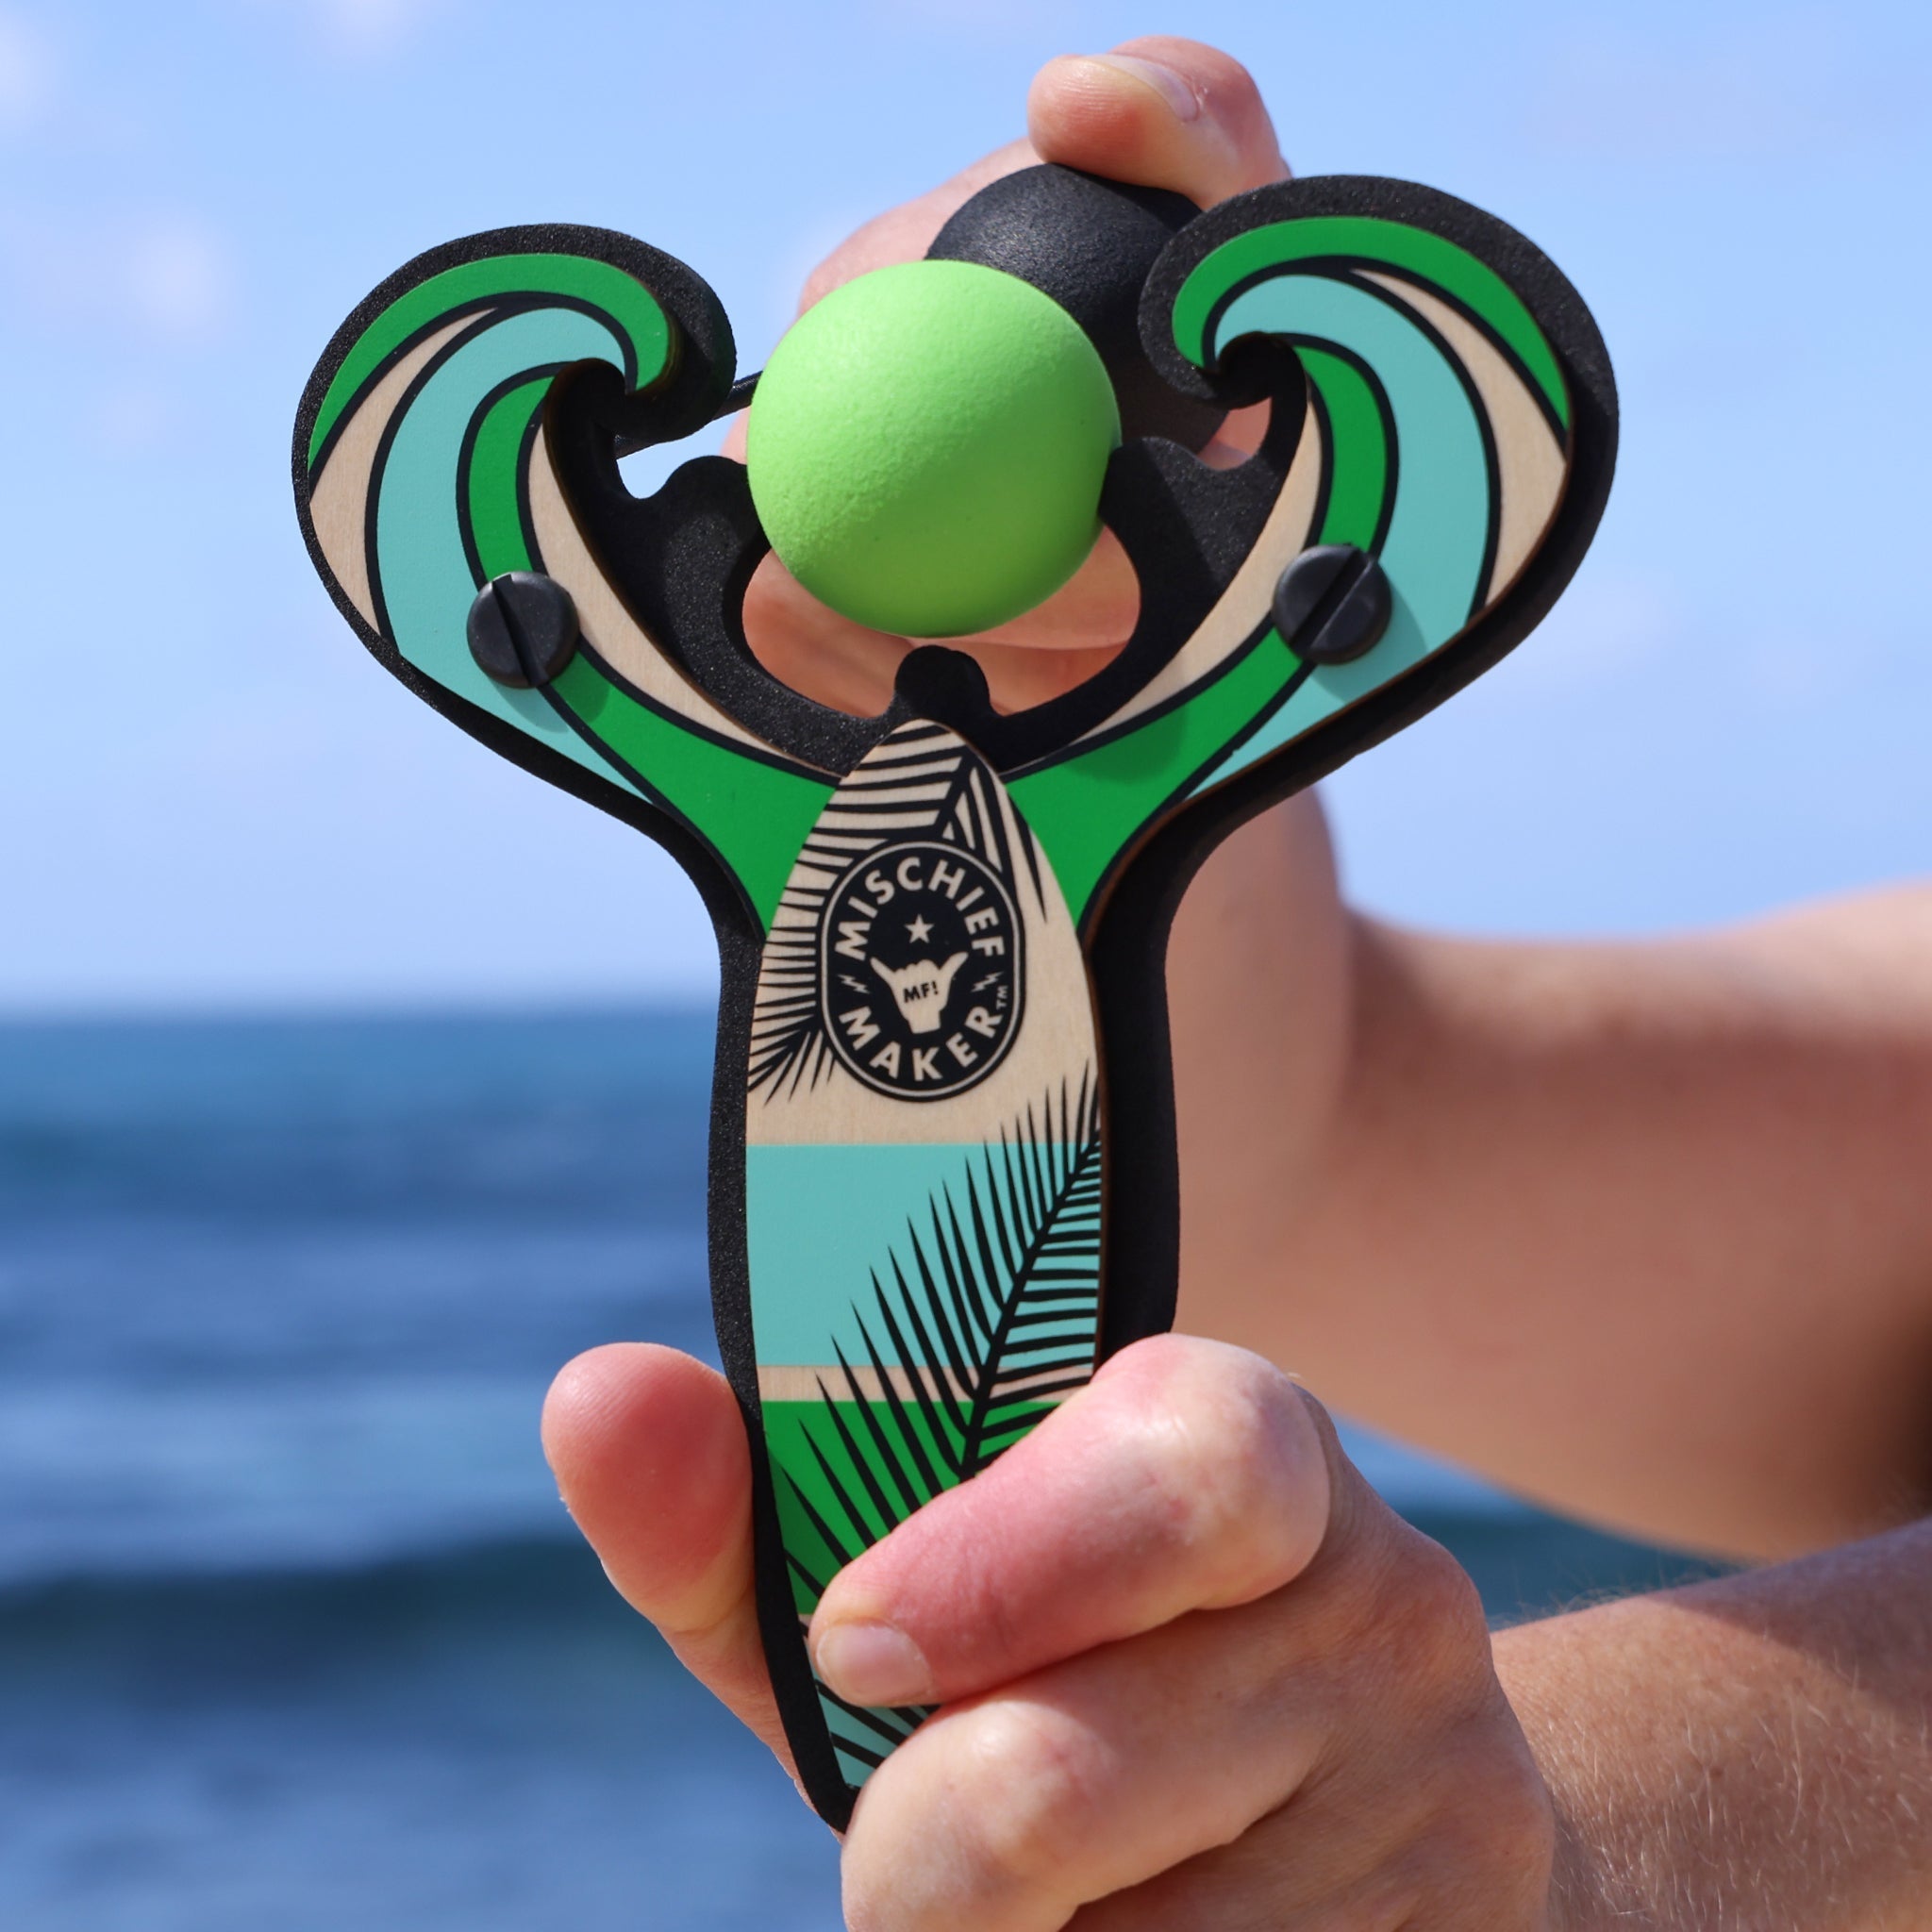 Green Surf’s Up toy slingshot being launched by the ocean. Mischief Maker by Mighty Fun! 